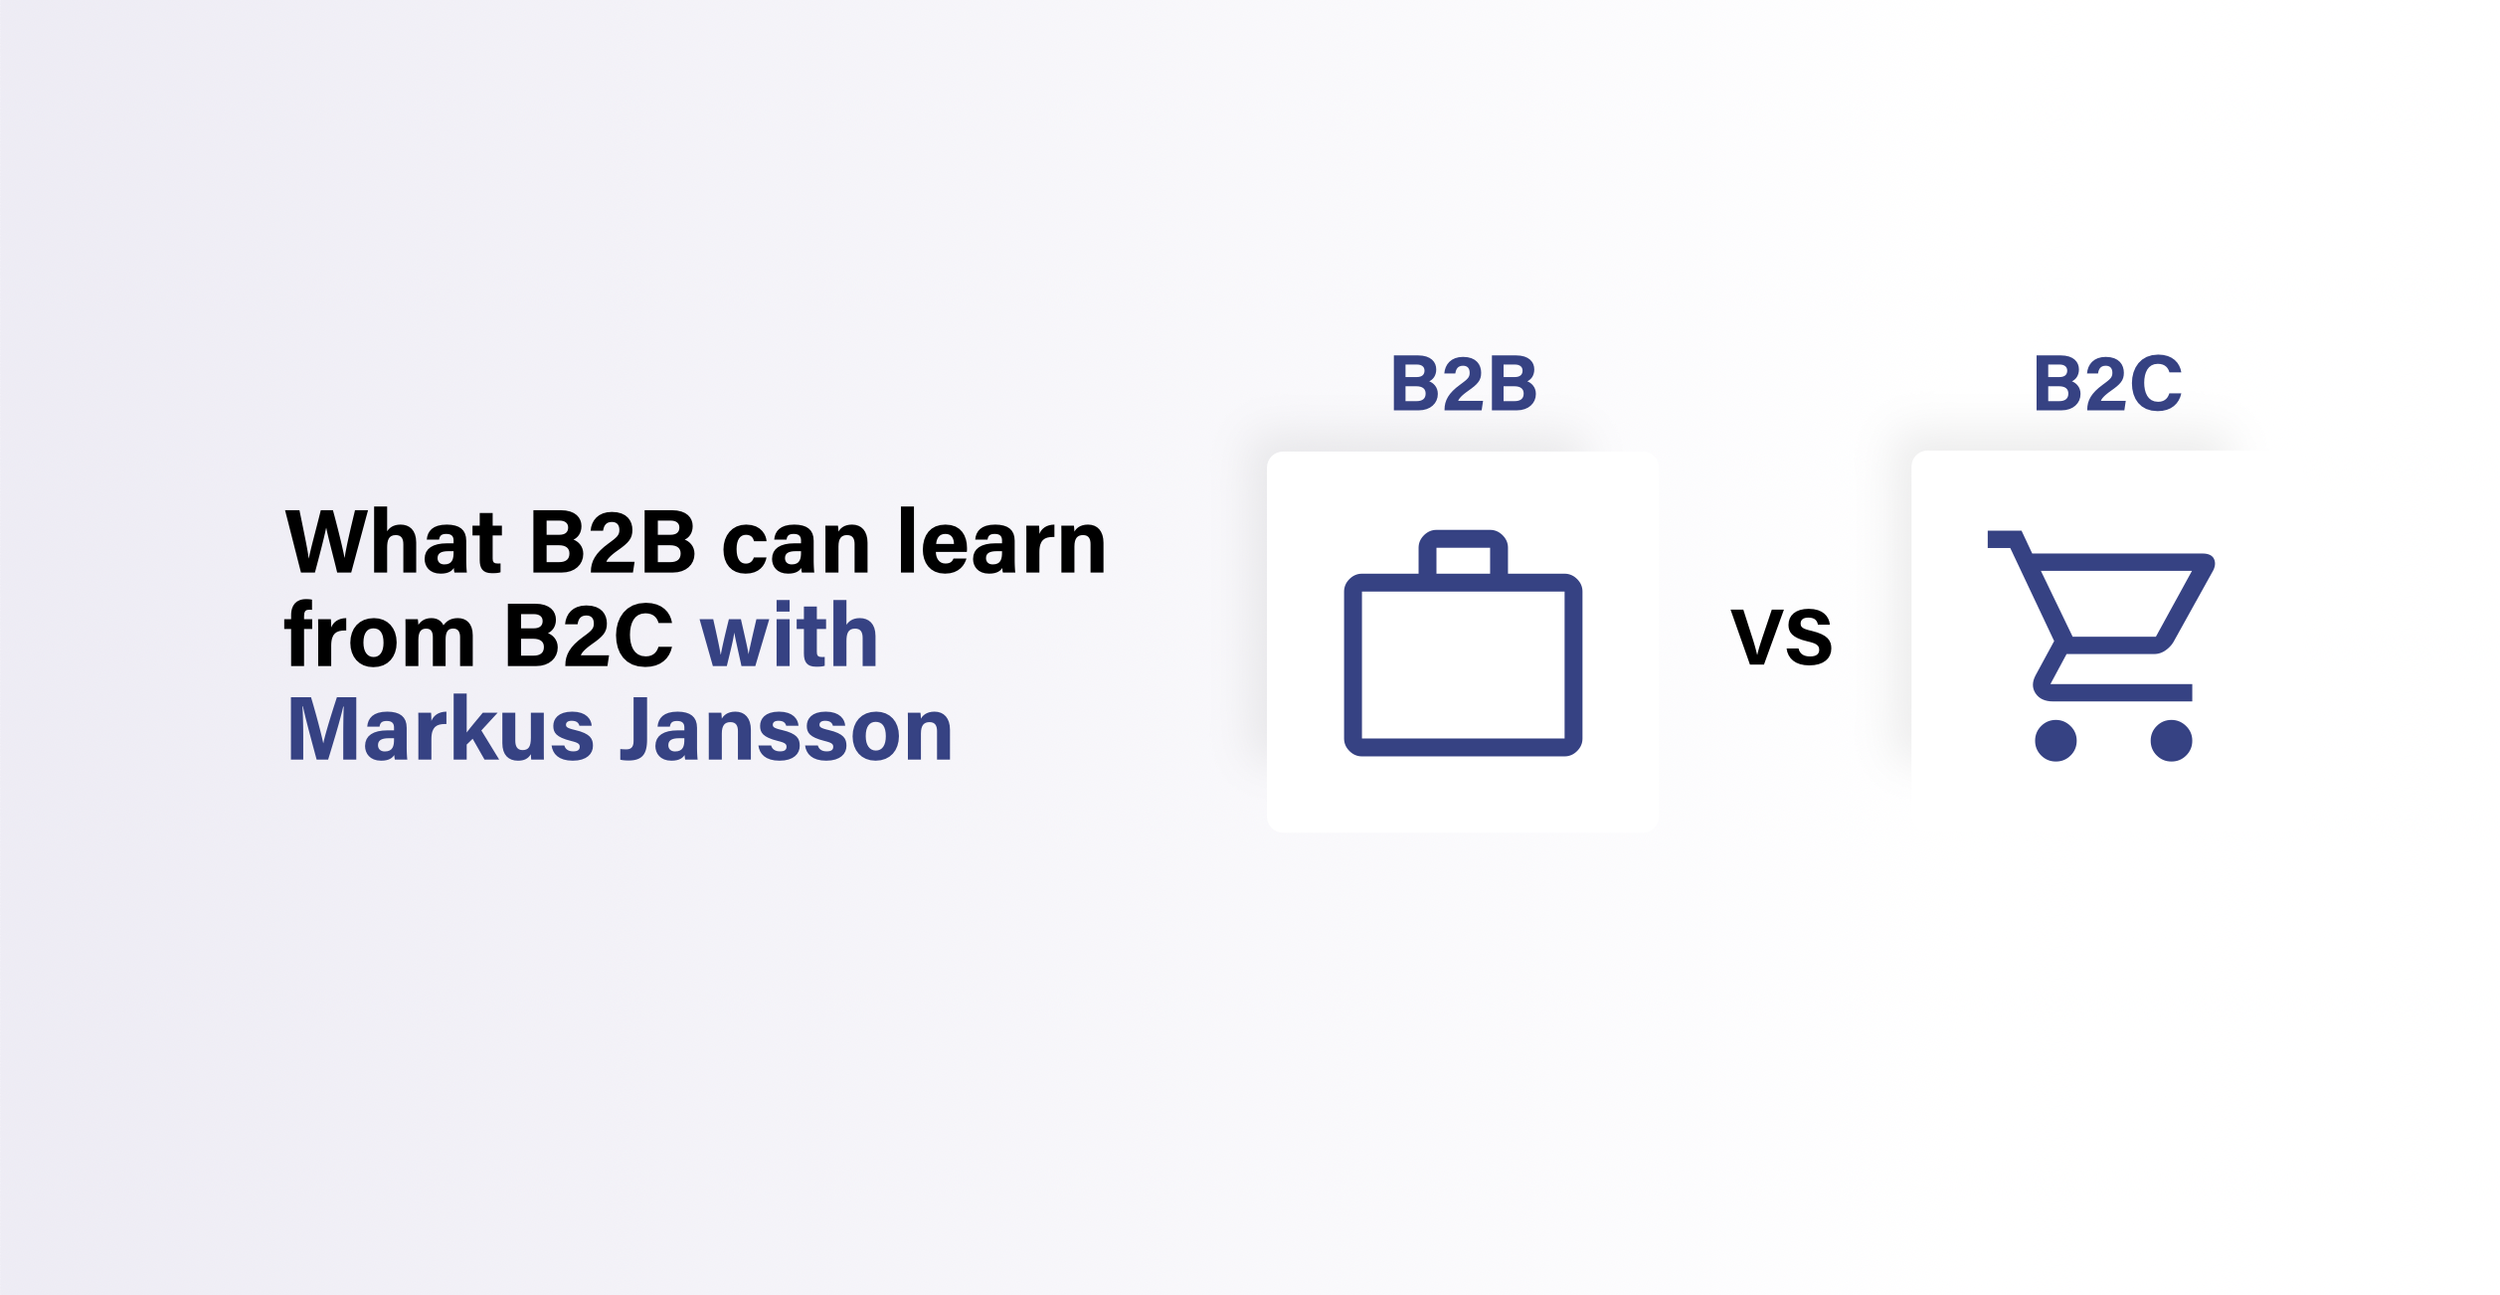 What B2B can learn from B2C with Markus Jansson